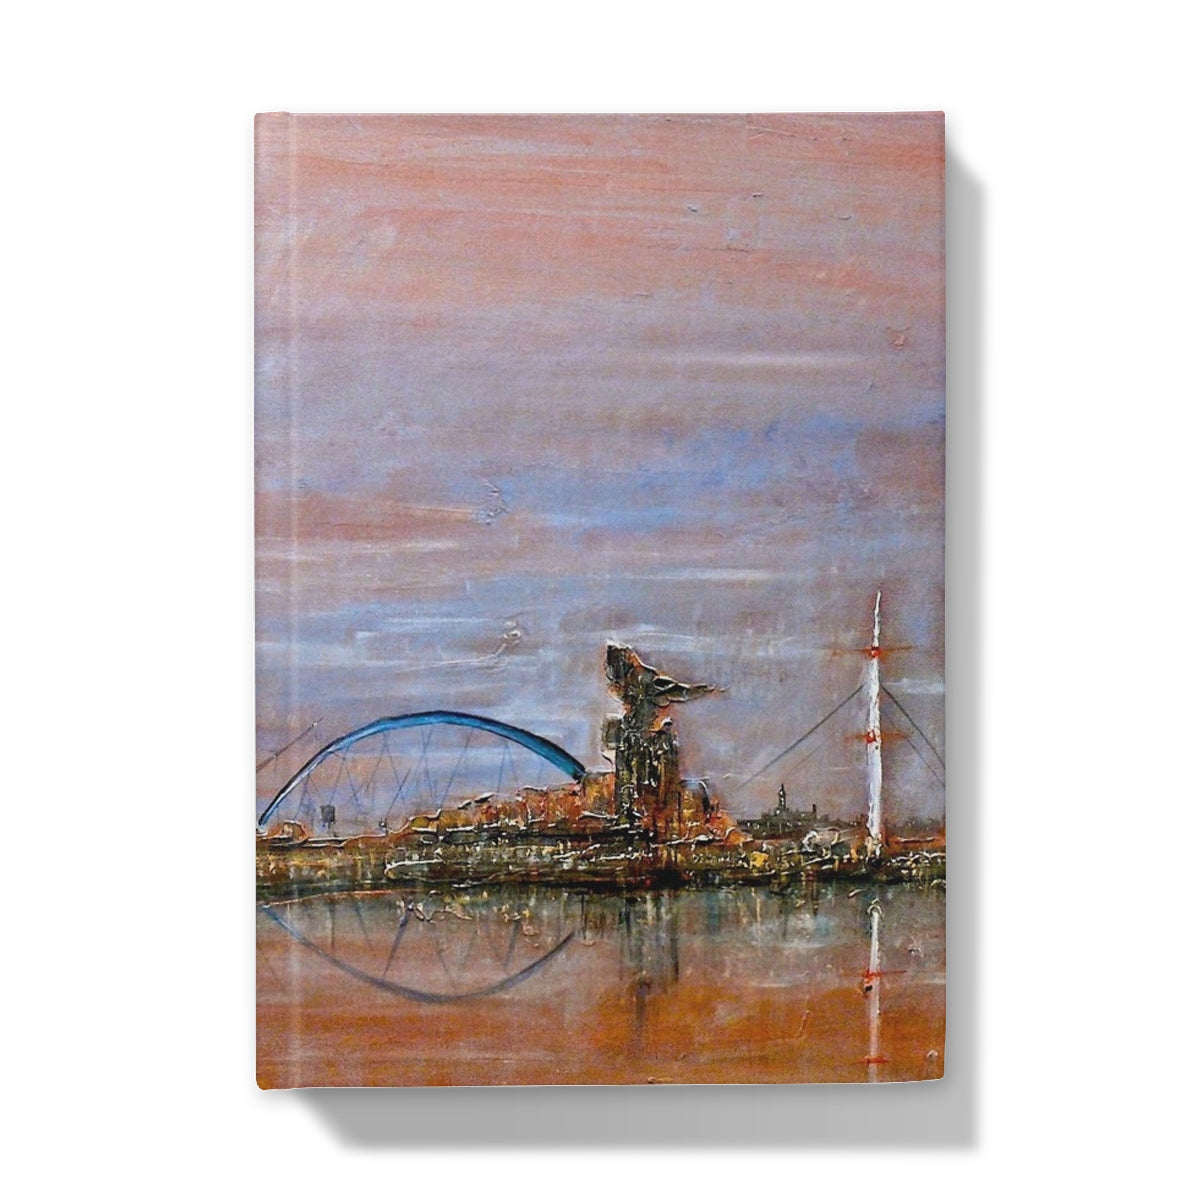 Glasgow Harbour Art Gifts Hardback Journal-Journals & Notebooks-Edinburgh & Glasgow Art Gallery-A4-Lined-Paintings, Prints, Homeware, Art Gifts From Scotland By Scottish Artist Kevin Hunter